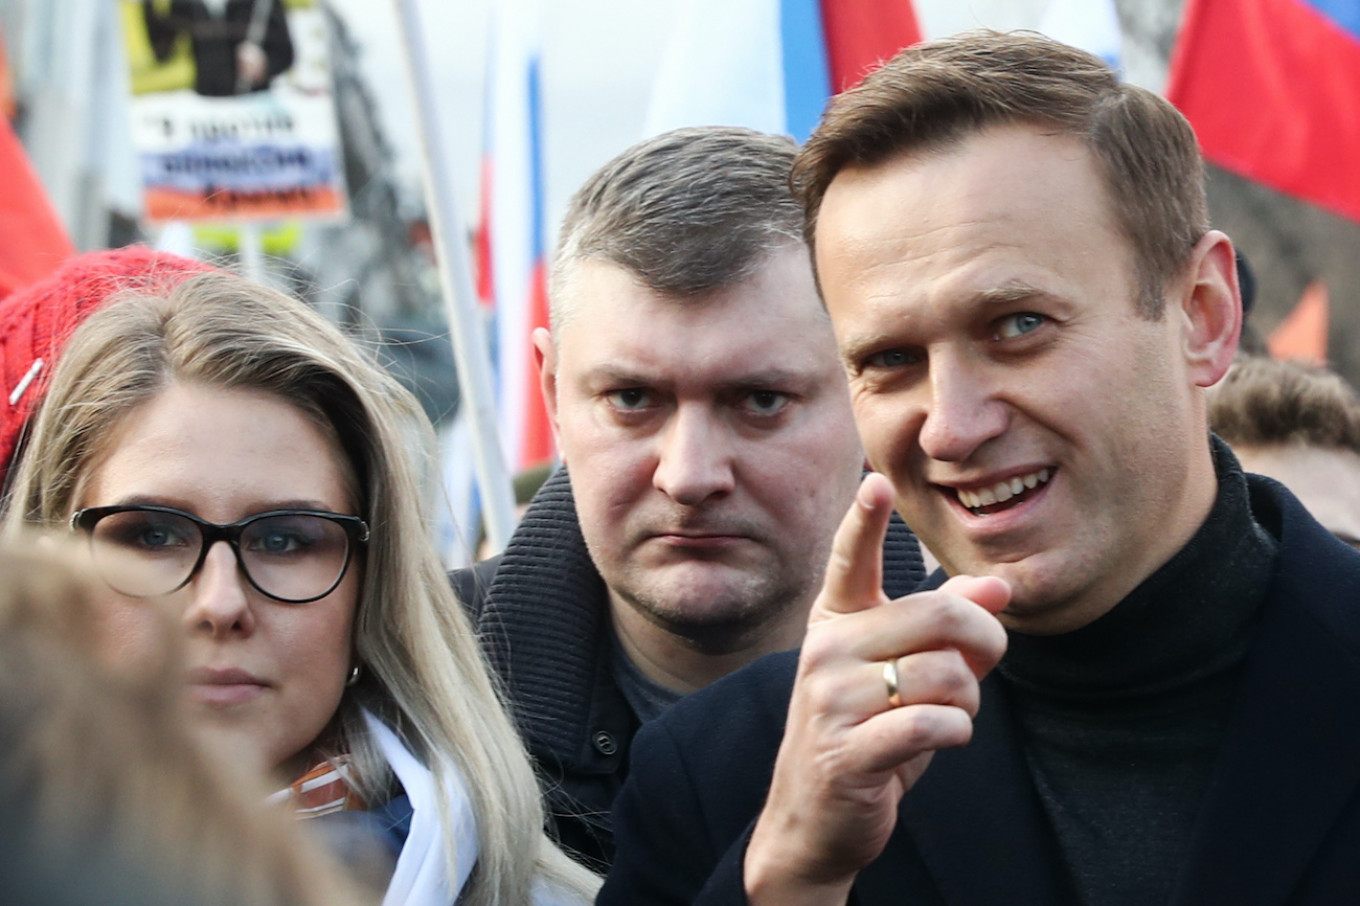 Vowing Return To Russia, Navalny Accuses Putin Over Poisoning